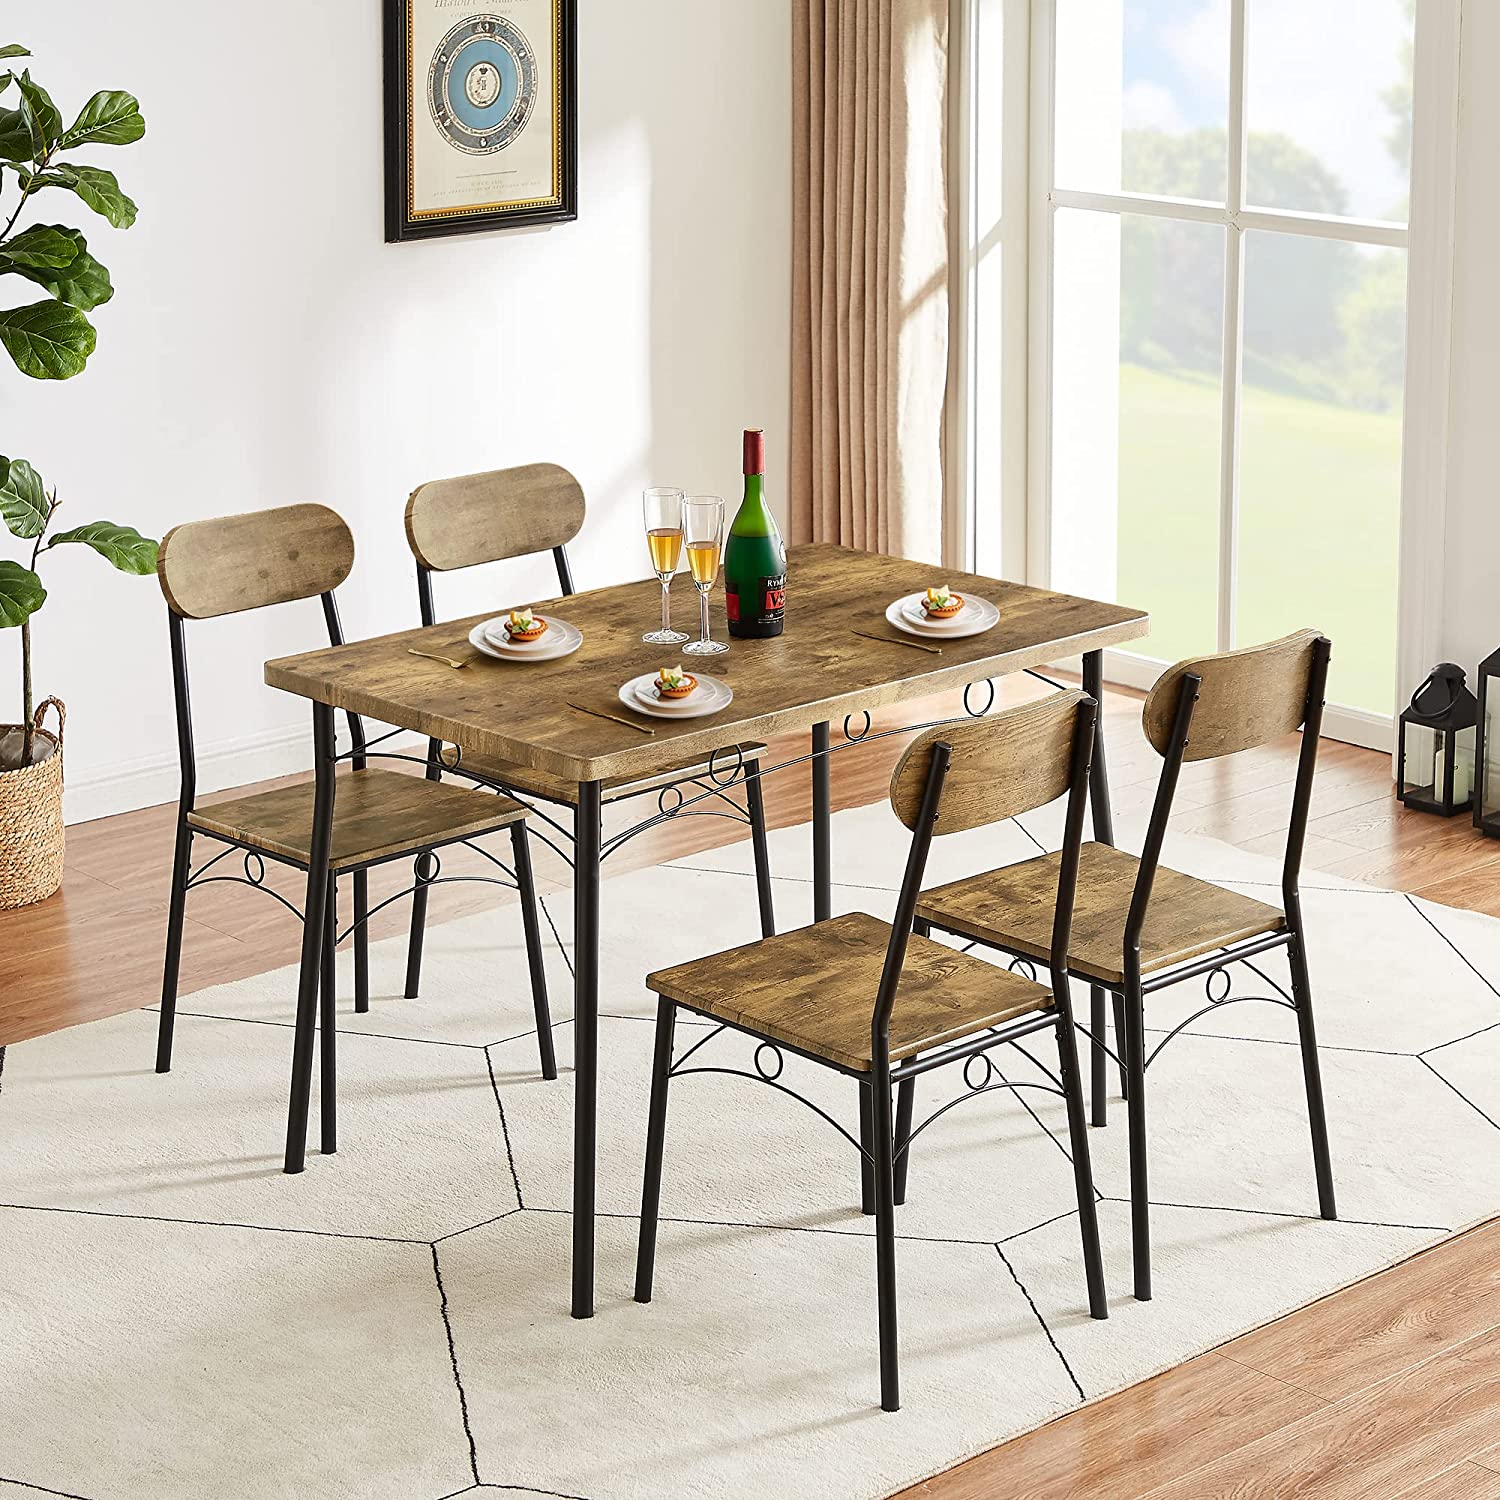 VECELO 5 Piece Dining Table Set Metal and Wood Rectangular Table with 4 Chairs for Breakfast Nook